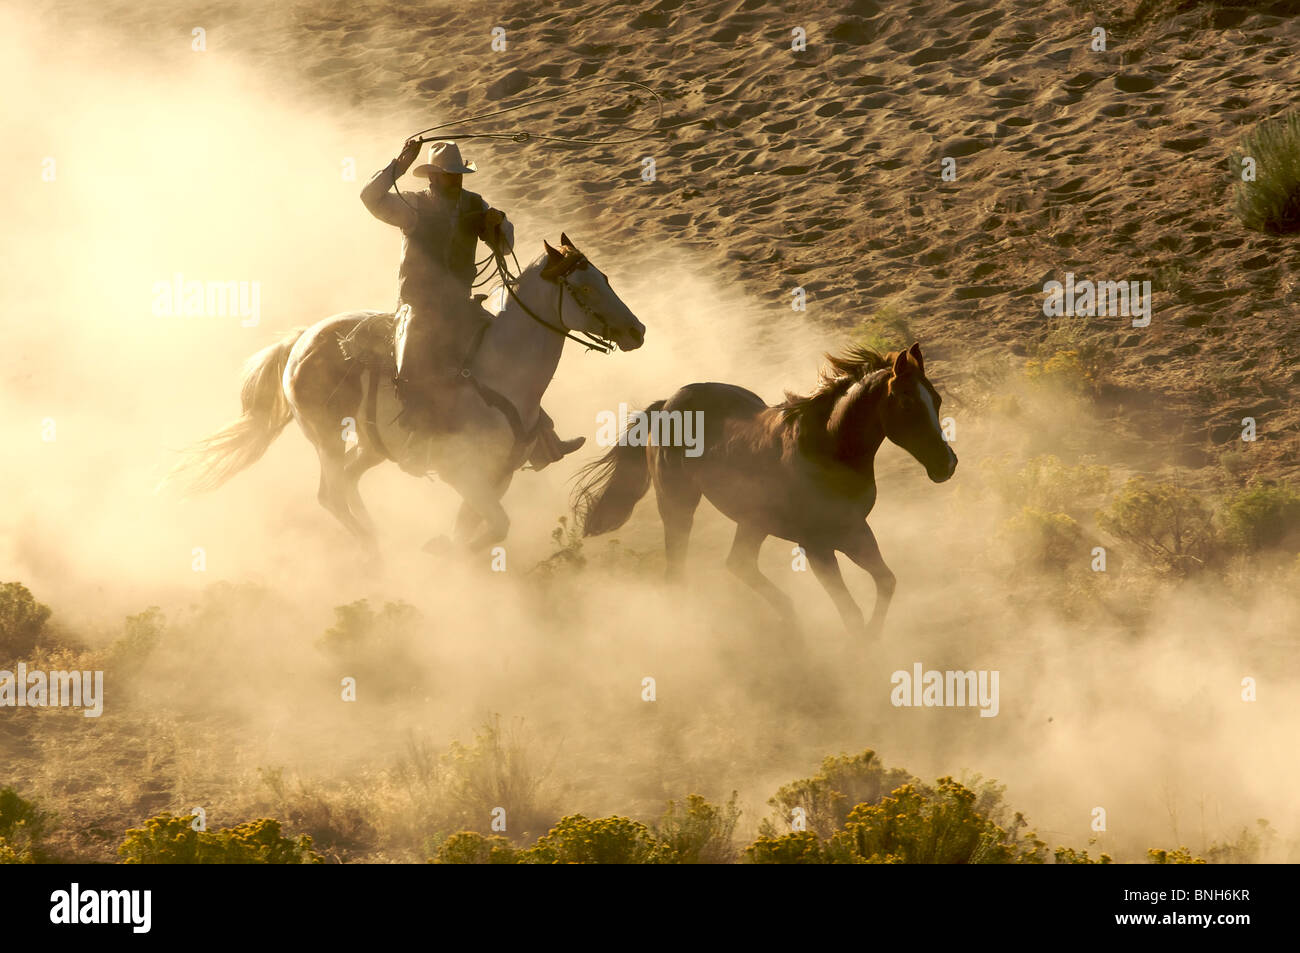 Cowboy galloping and roping wild horses through the desert Stock Photo